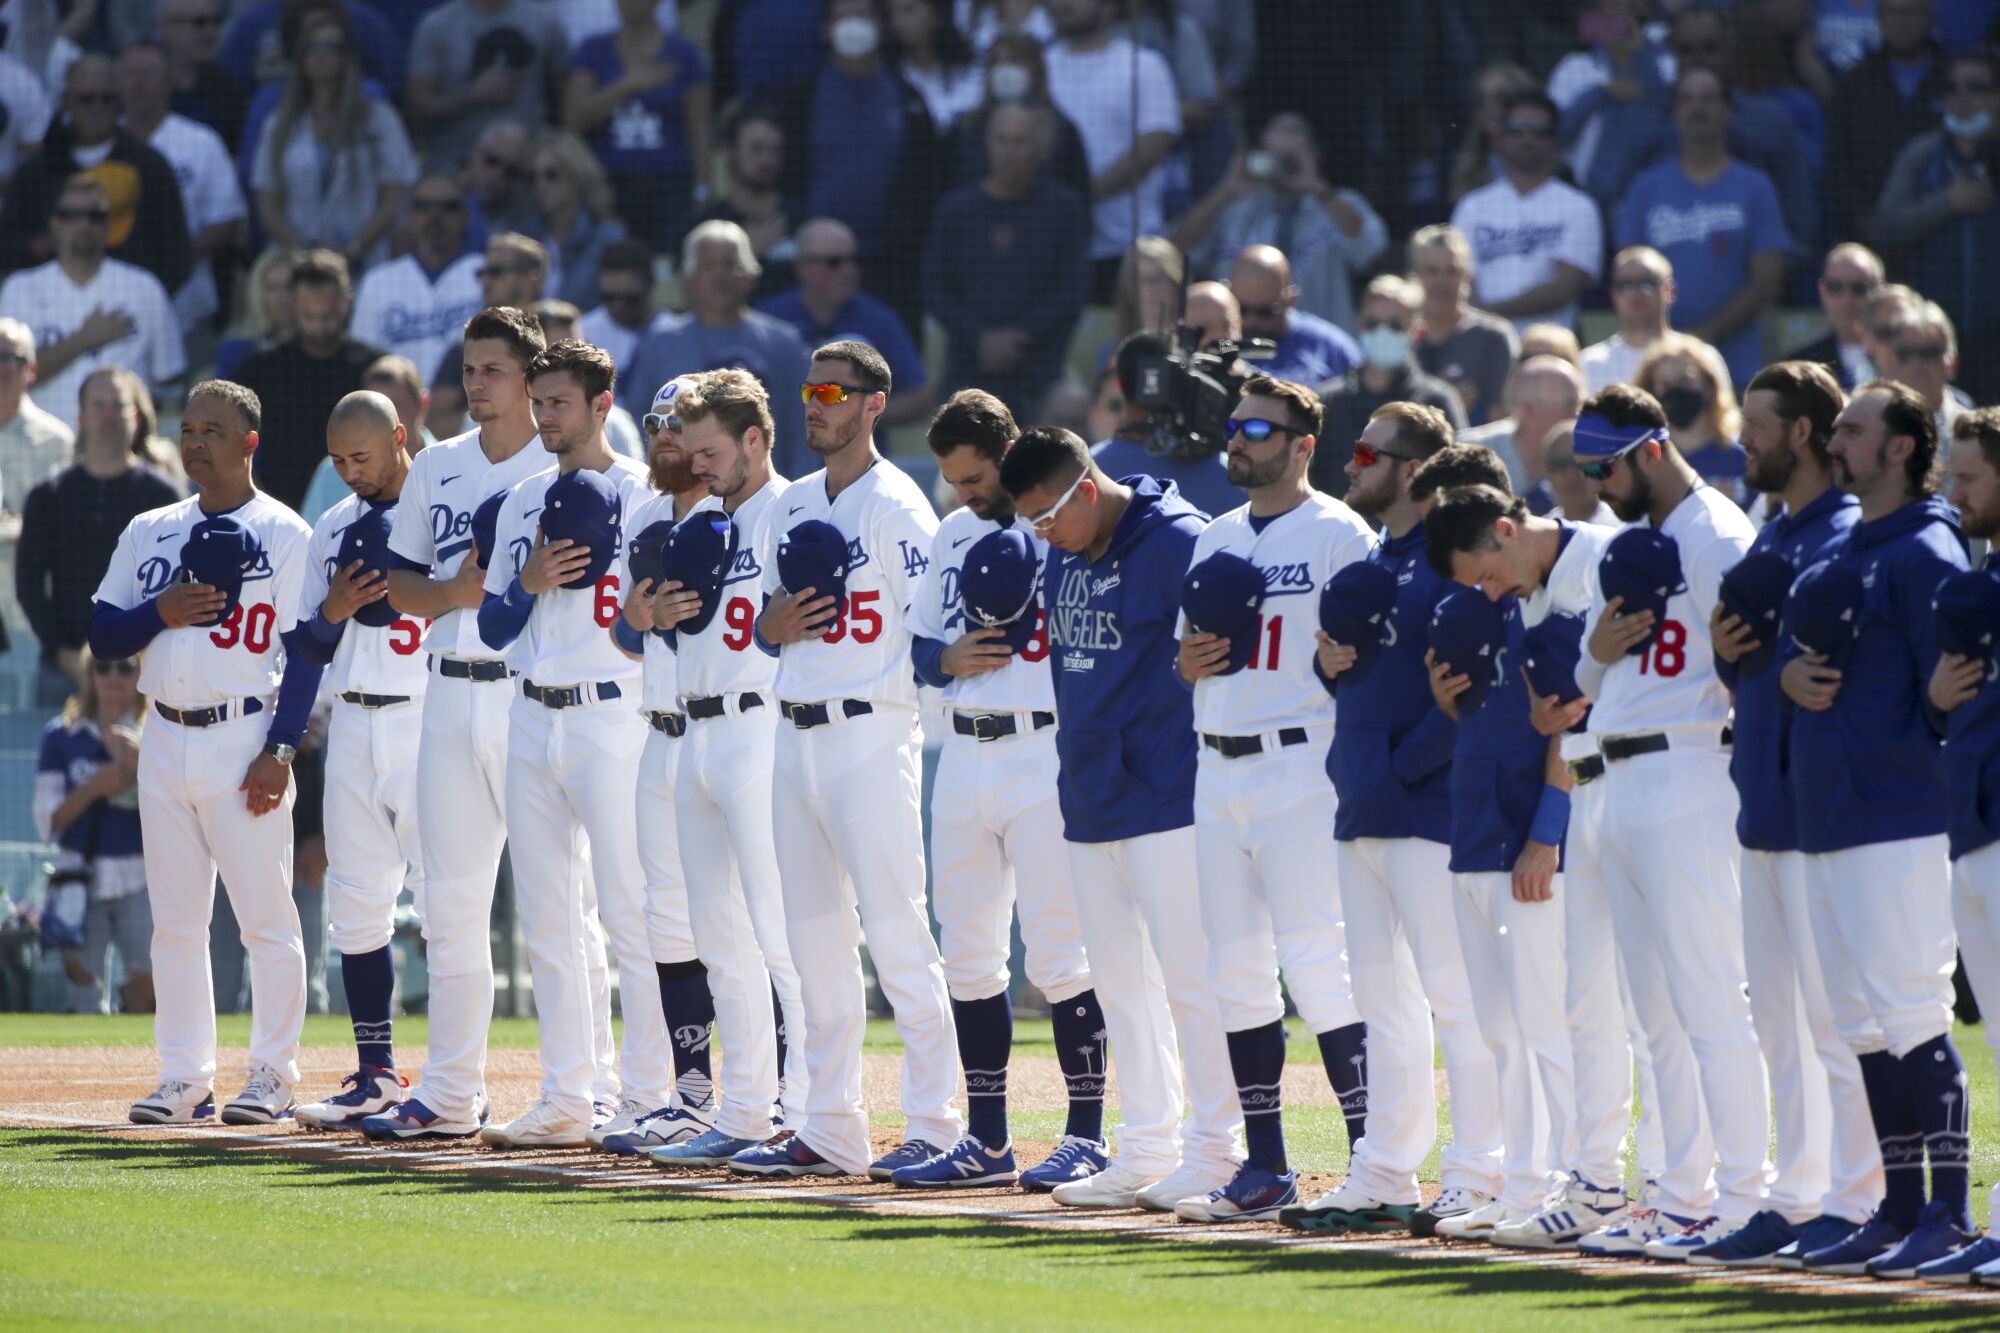 Dodgers stand for the national anthem before Game 3.